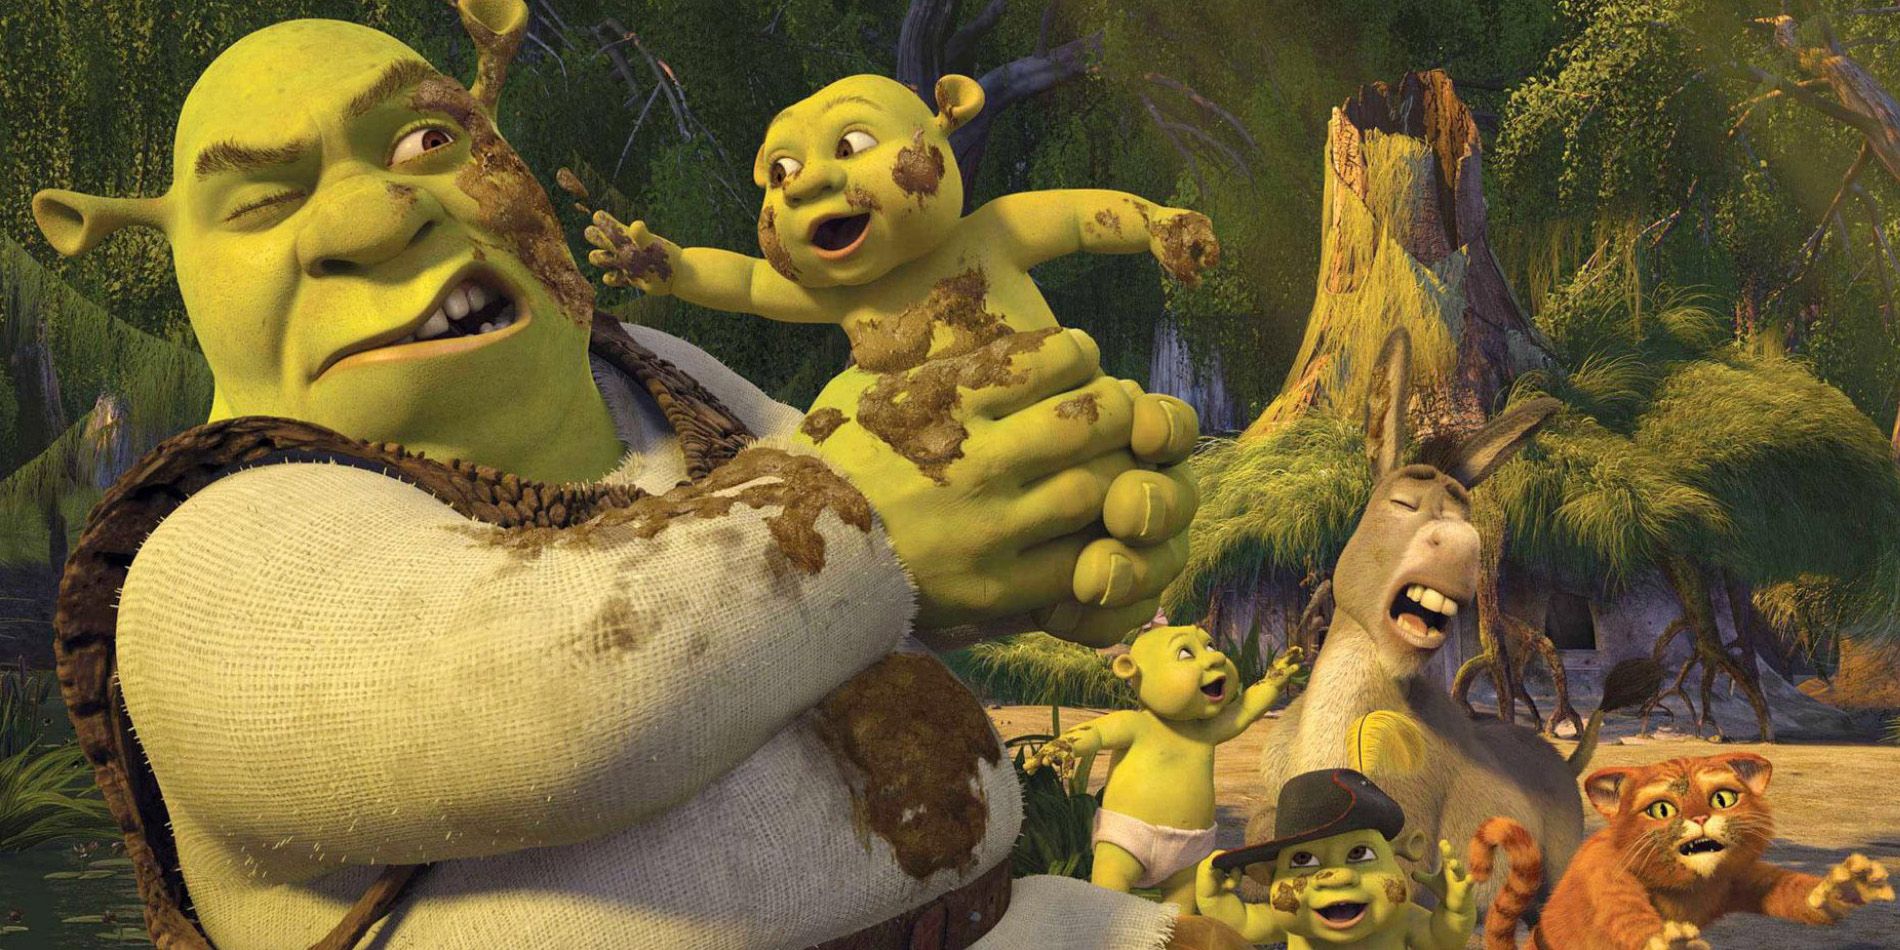 Shrek the third in a messy scene with a baby